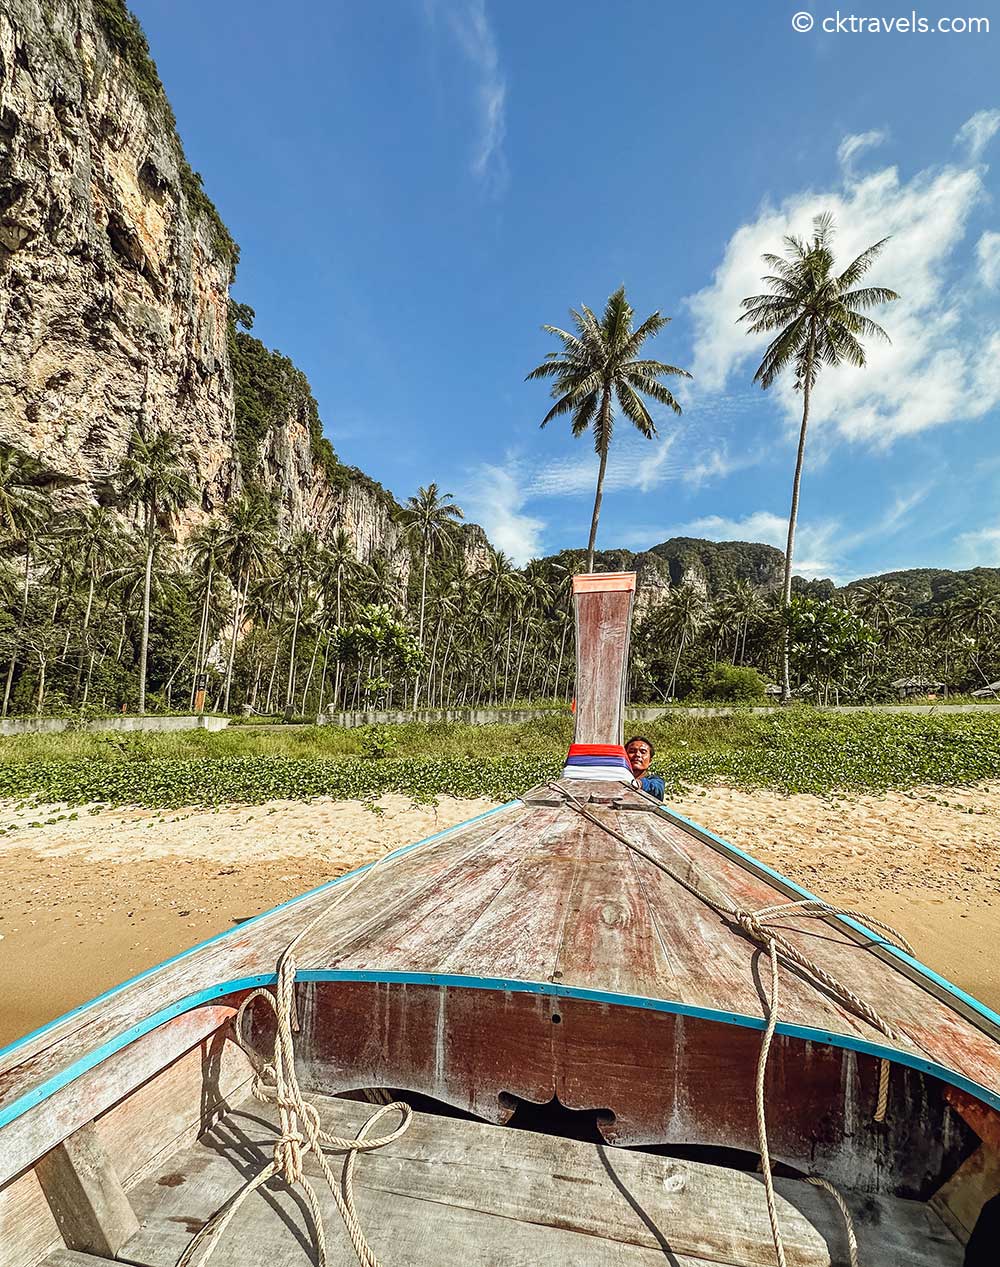 How to get from Krabi (Ao Nang) to Railay Beach by longtail boat 